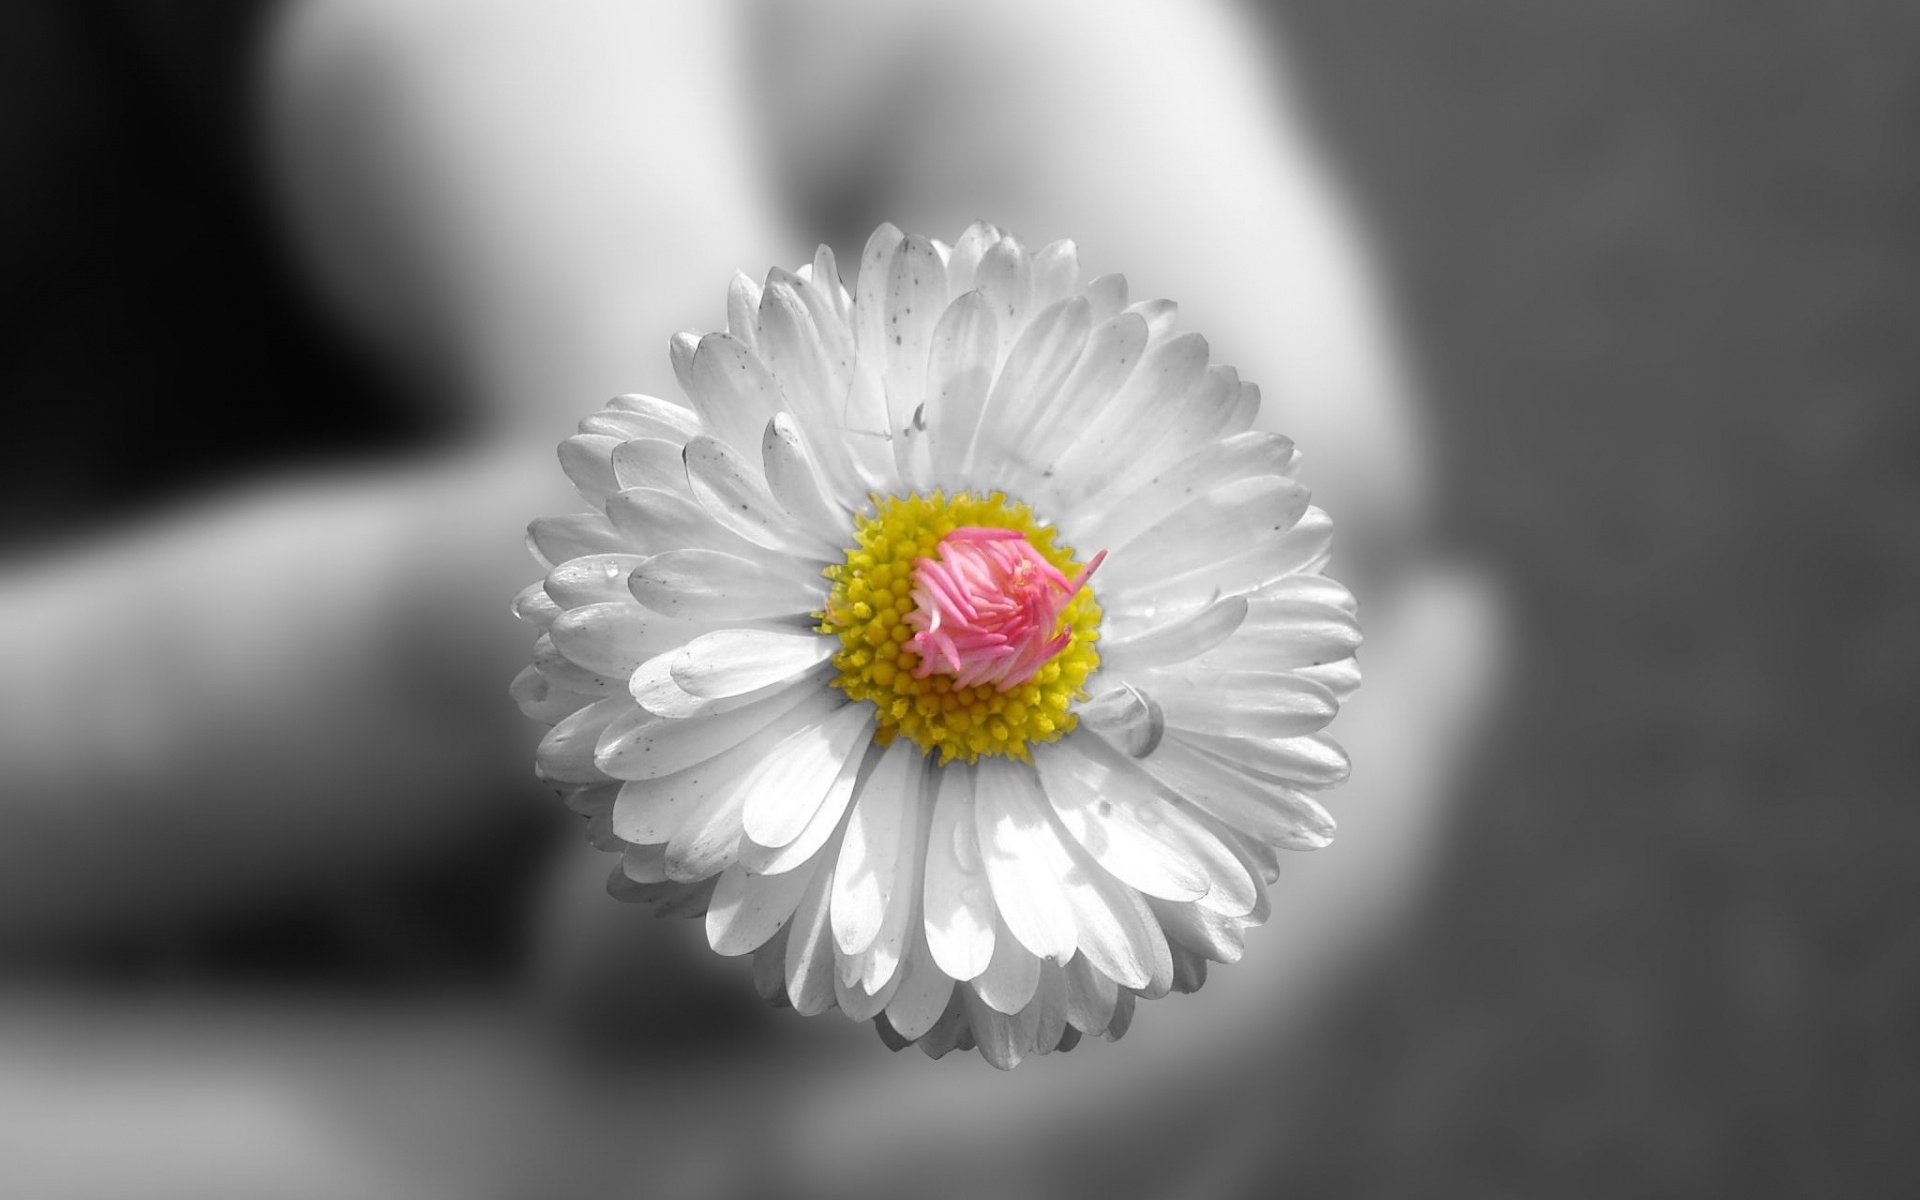 An unusual white flower with a pink center.